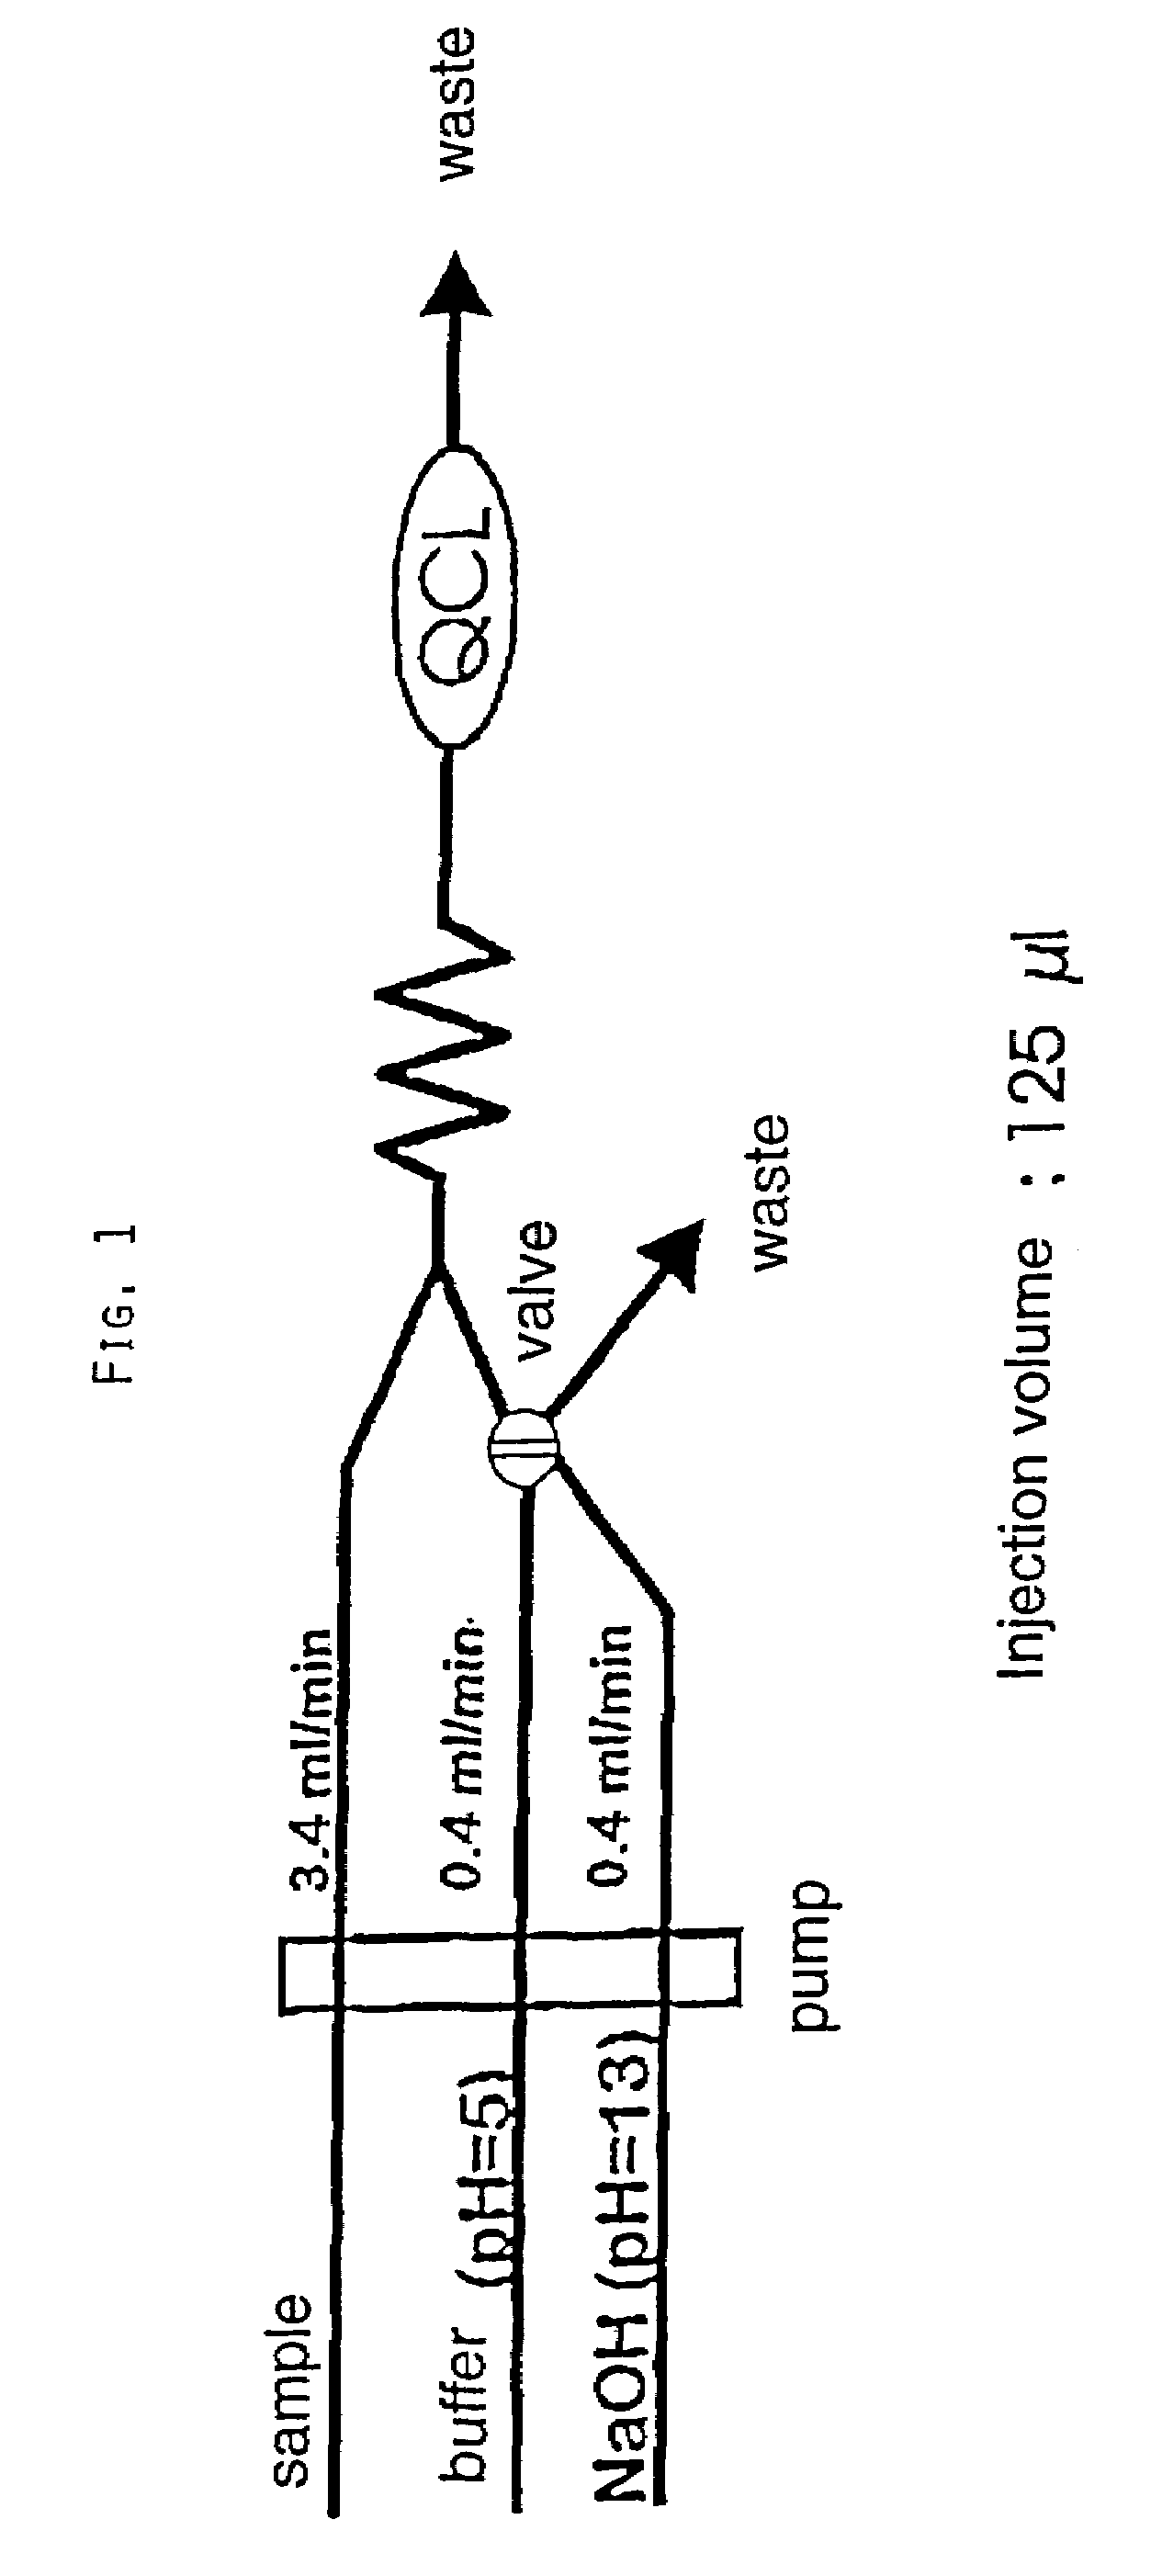 Method of infrared-optically determining the concentration of at least one analyte in a liquid sample